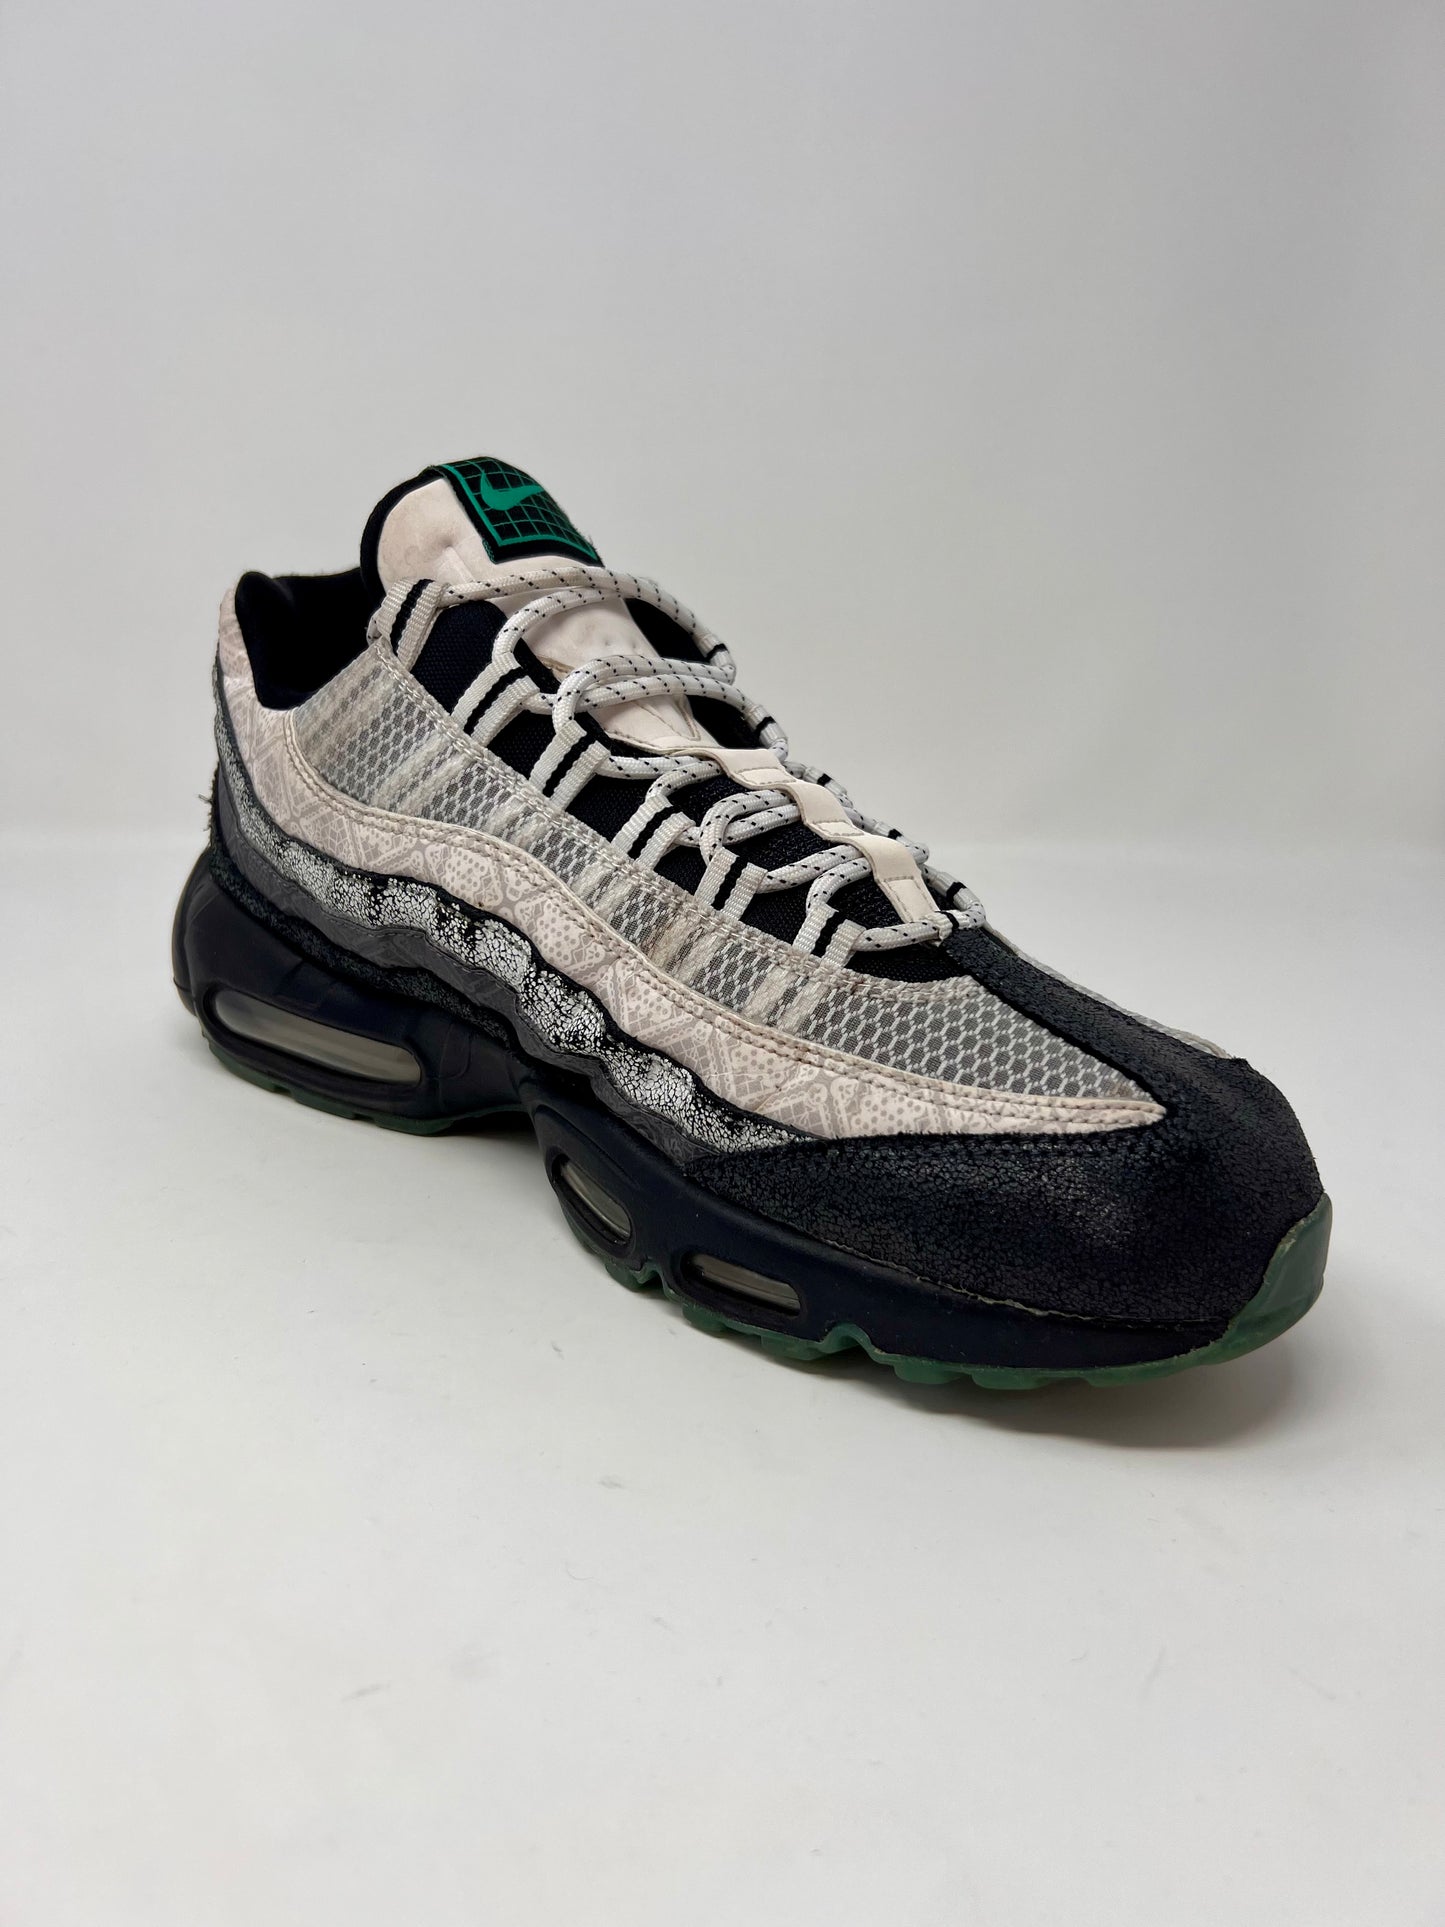 Nike Air Max 95 Day Of The Dead UK10.5